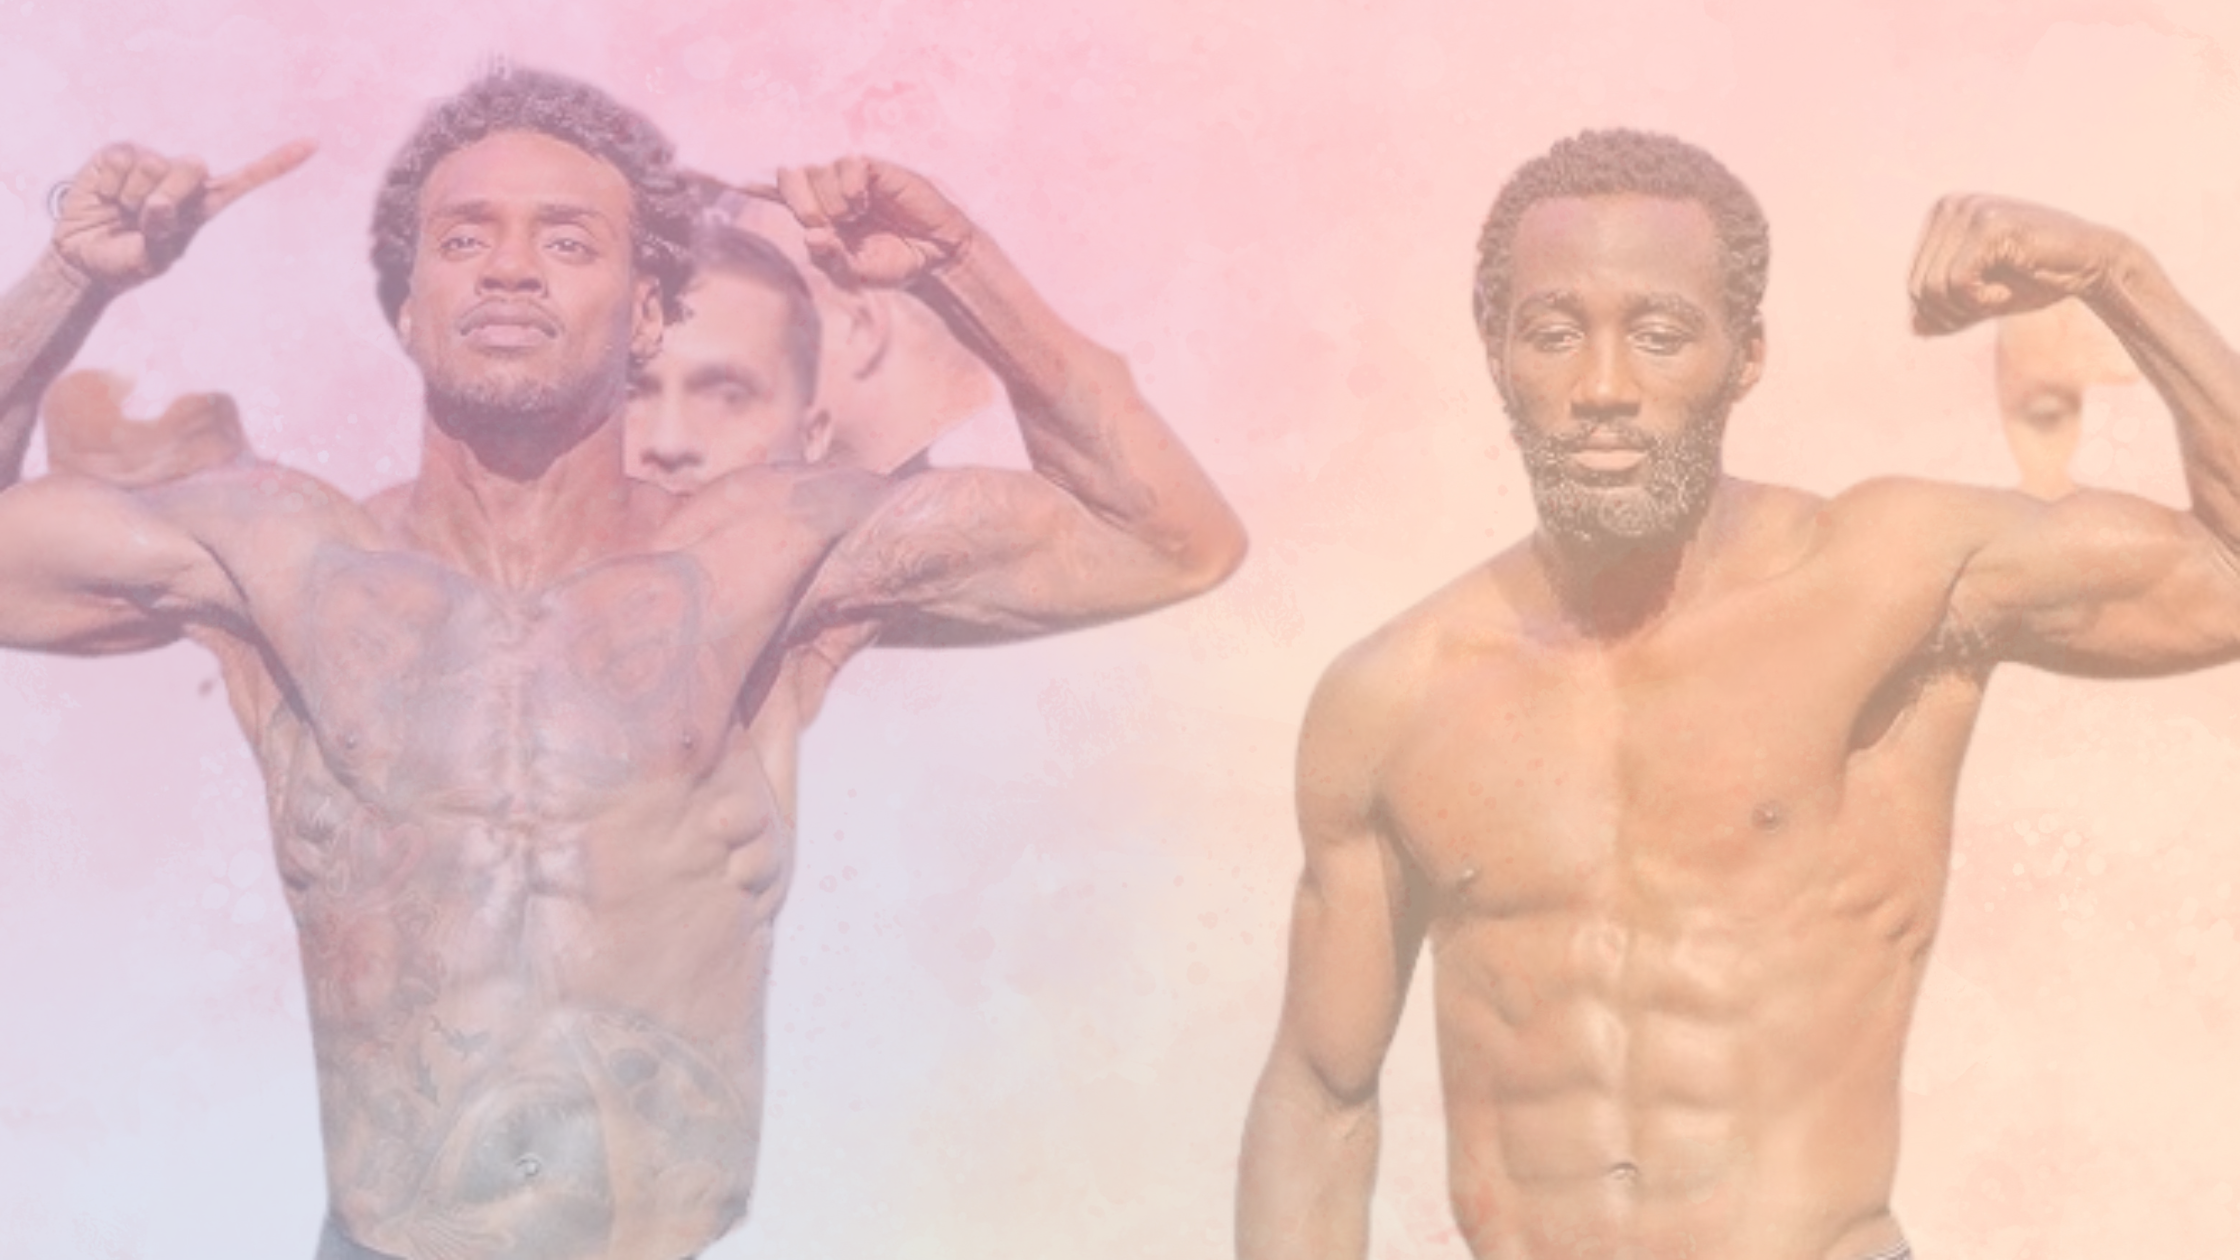 “The Long-Awaited Showdown: Errol Spence Jr. vs. Terence Crawford Finally Comes to Fruition”